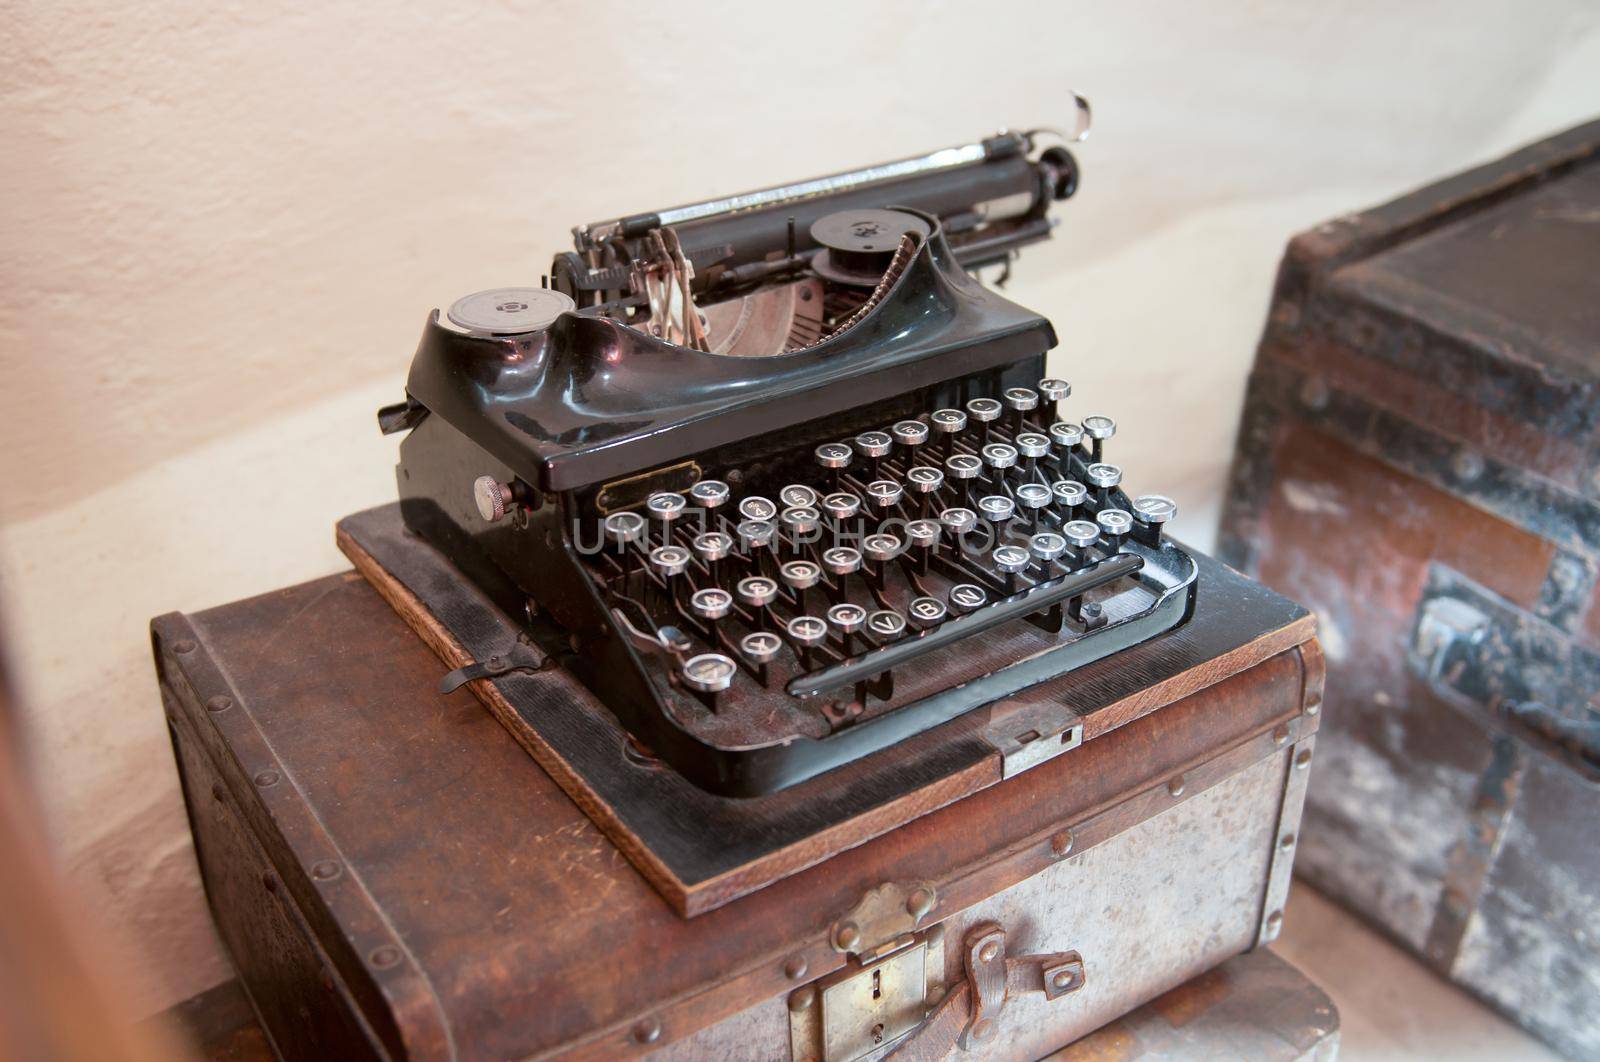 Old Antique Typewriter on a Wood Counter. old typing machine on the chest